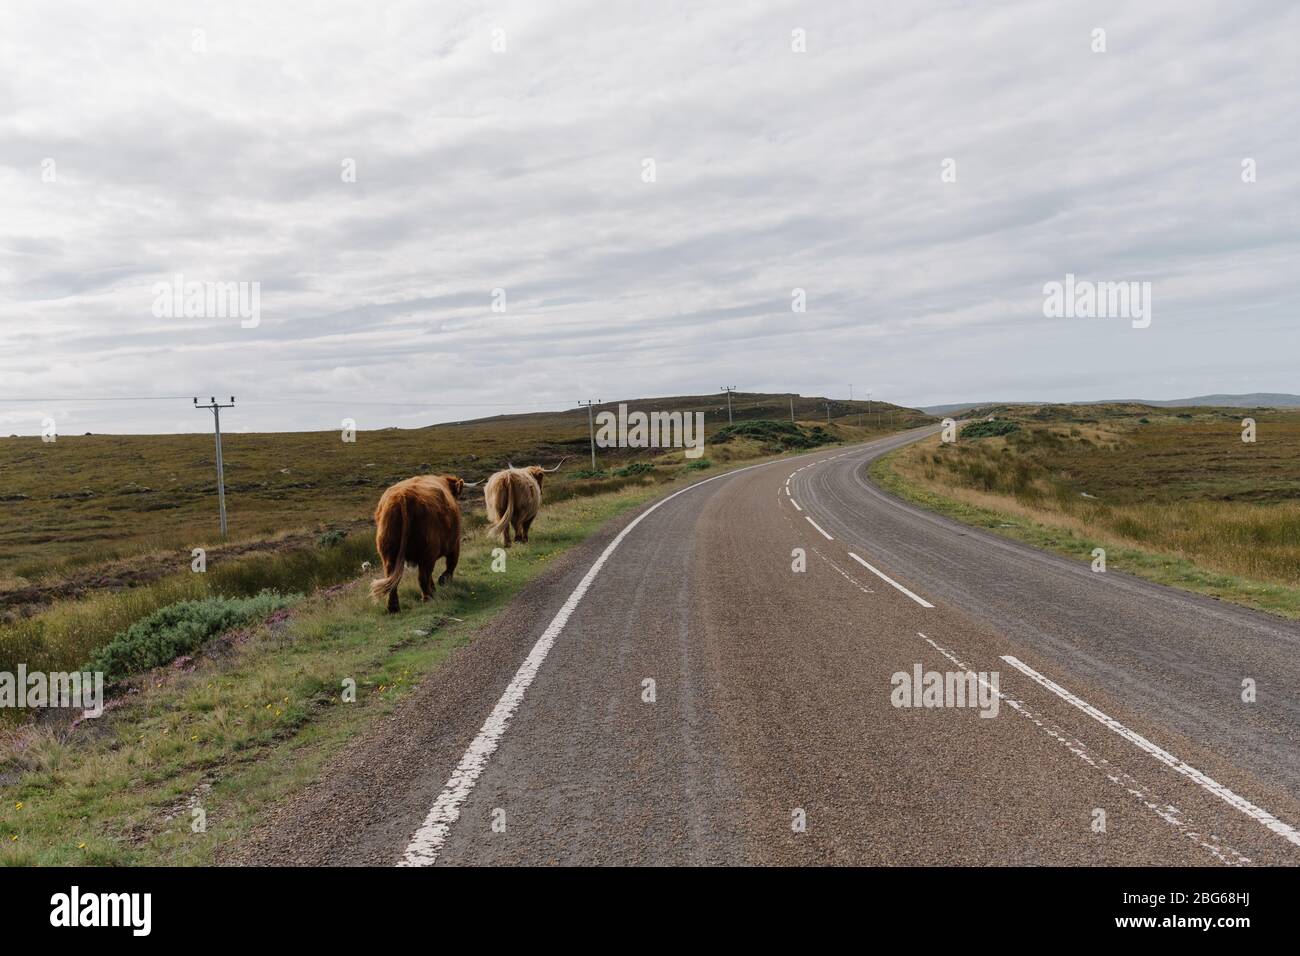 A herd of Highland cattle walk along the road near Thurso which is a part of the famous North Coast 500 road trip route in Northern Scotland, UK Stock Photo